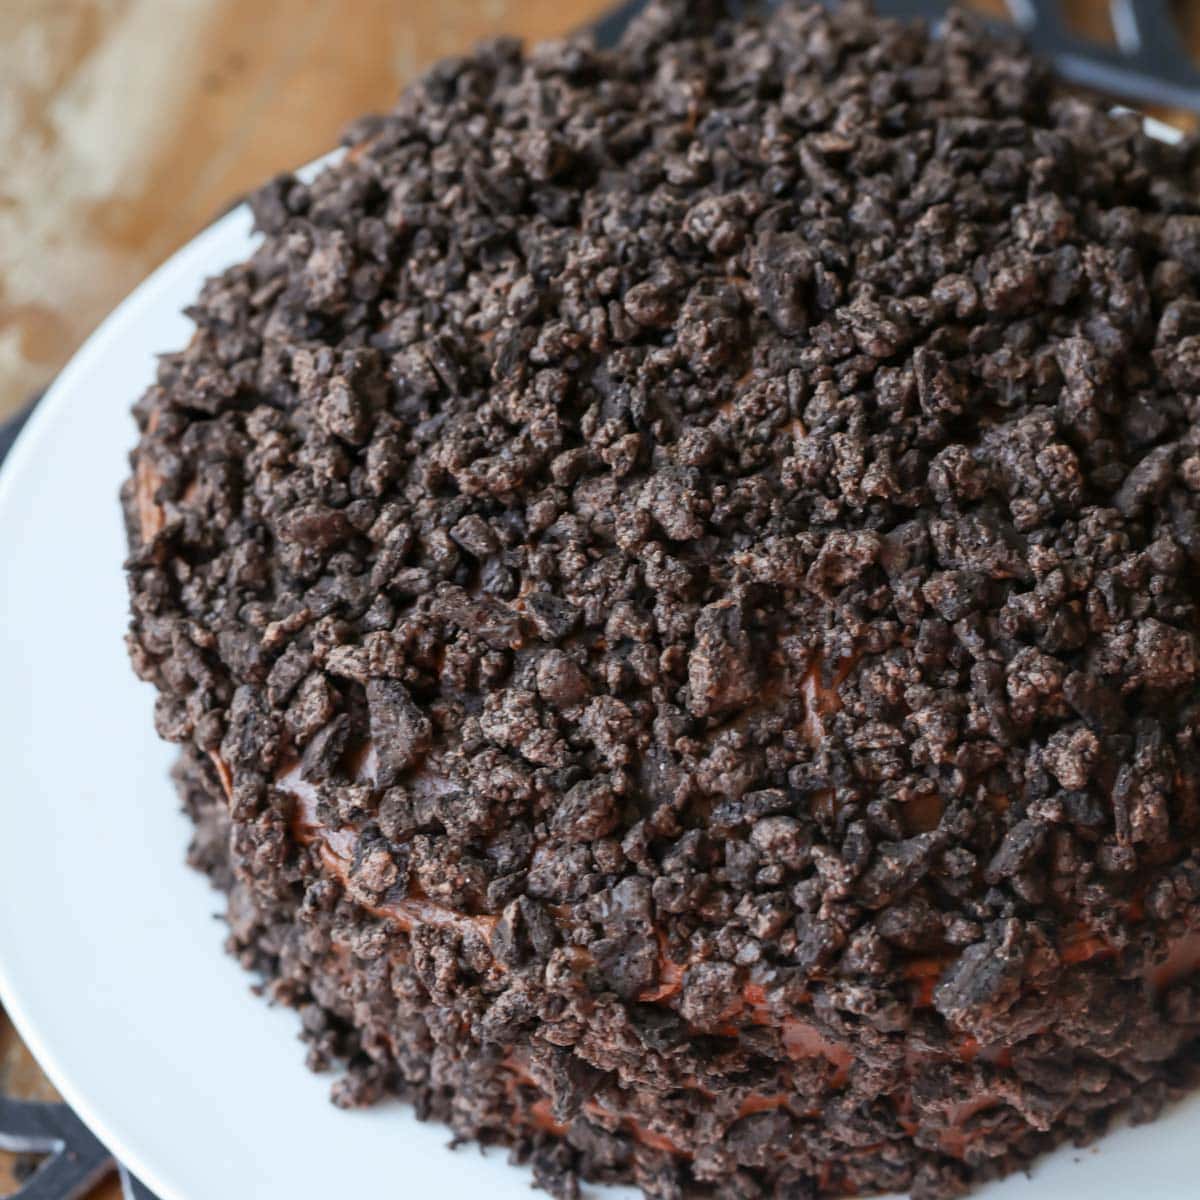 Chocolate cake covered in crushed Oreo.